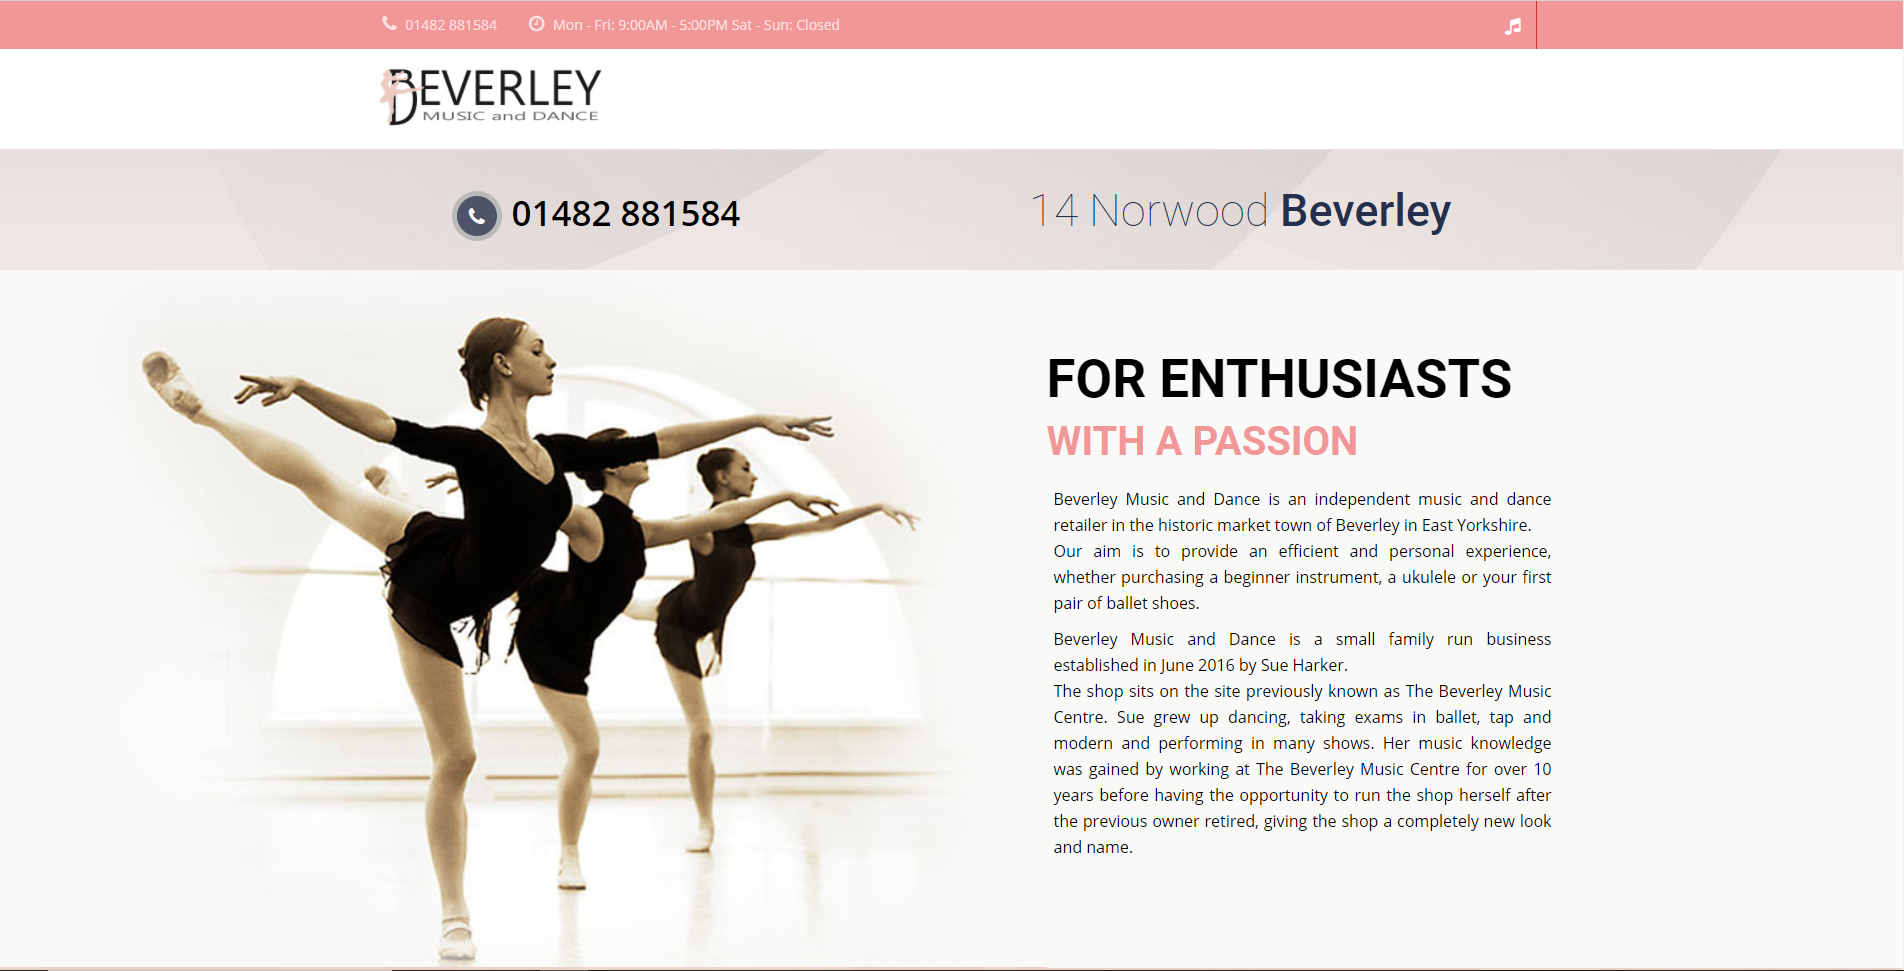 Beverley Music and Dance